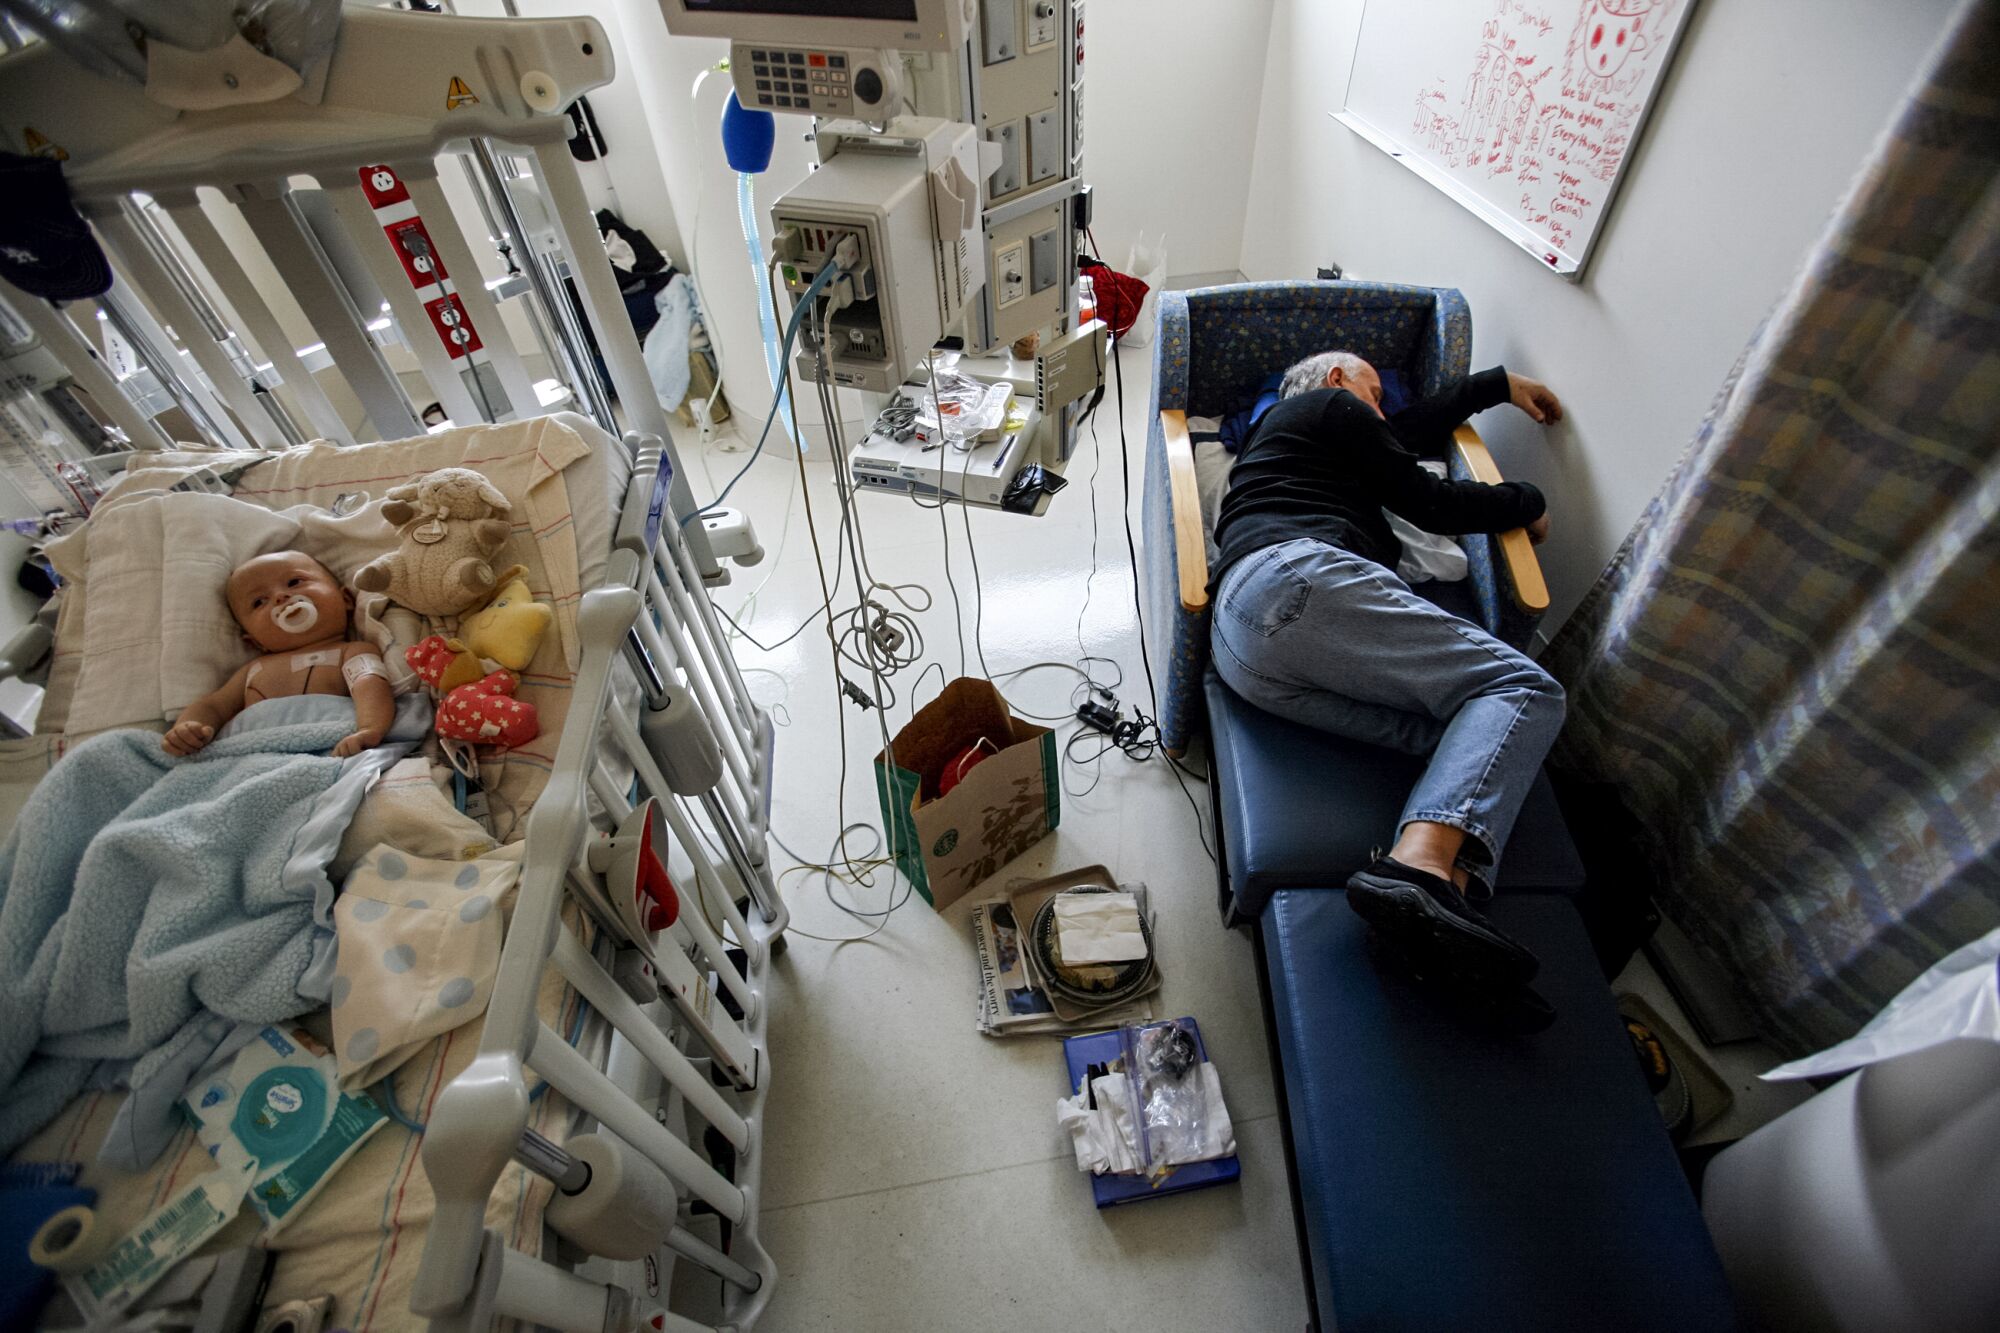  Jeff Catania, 60, falls asleep next to his two-month-old son Dylan in a hospital room